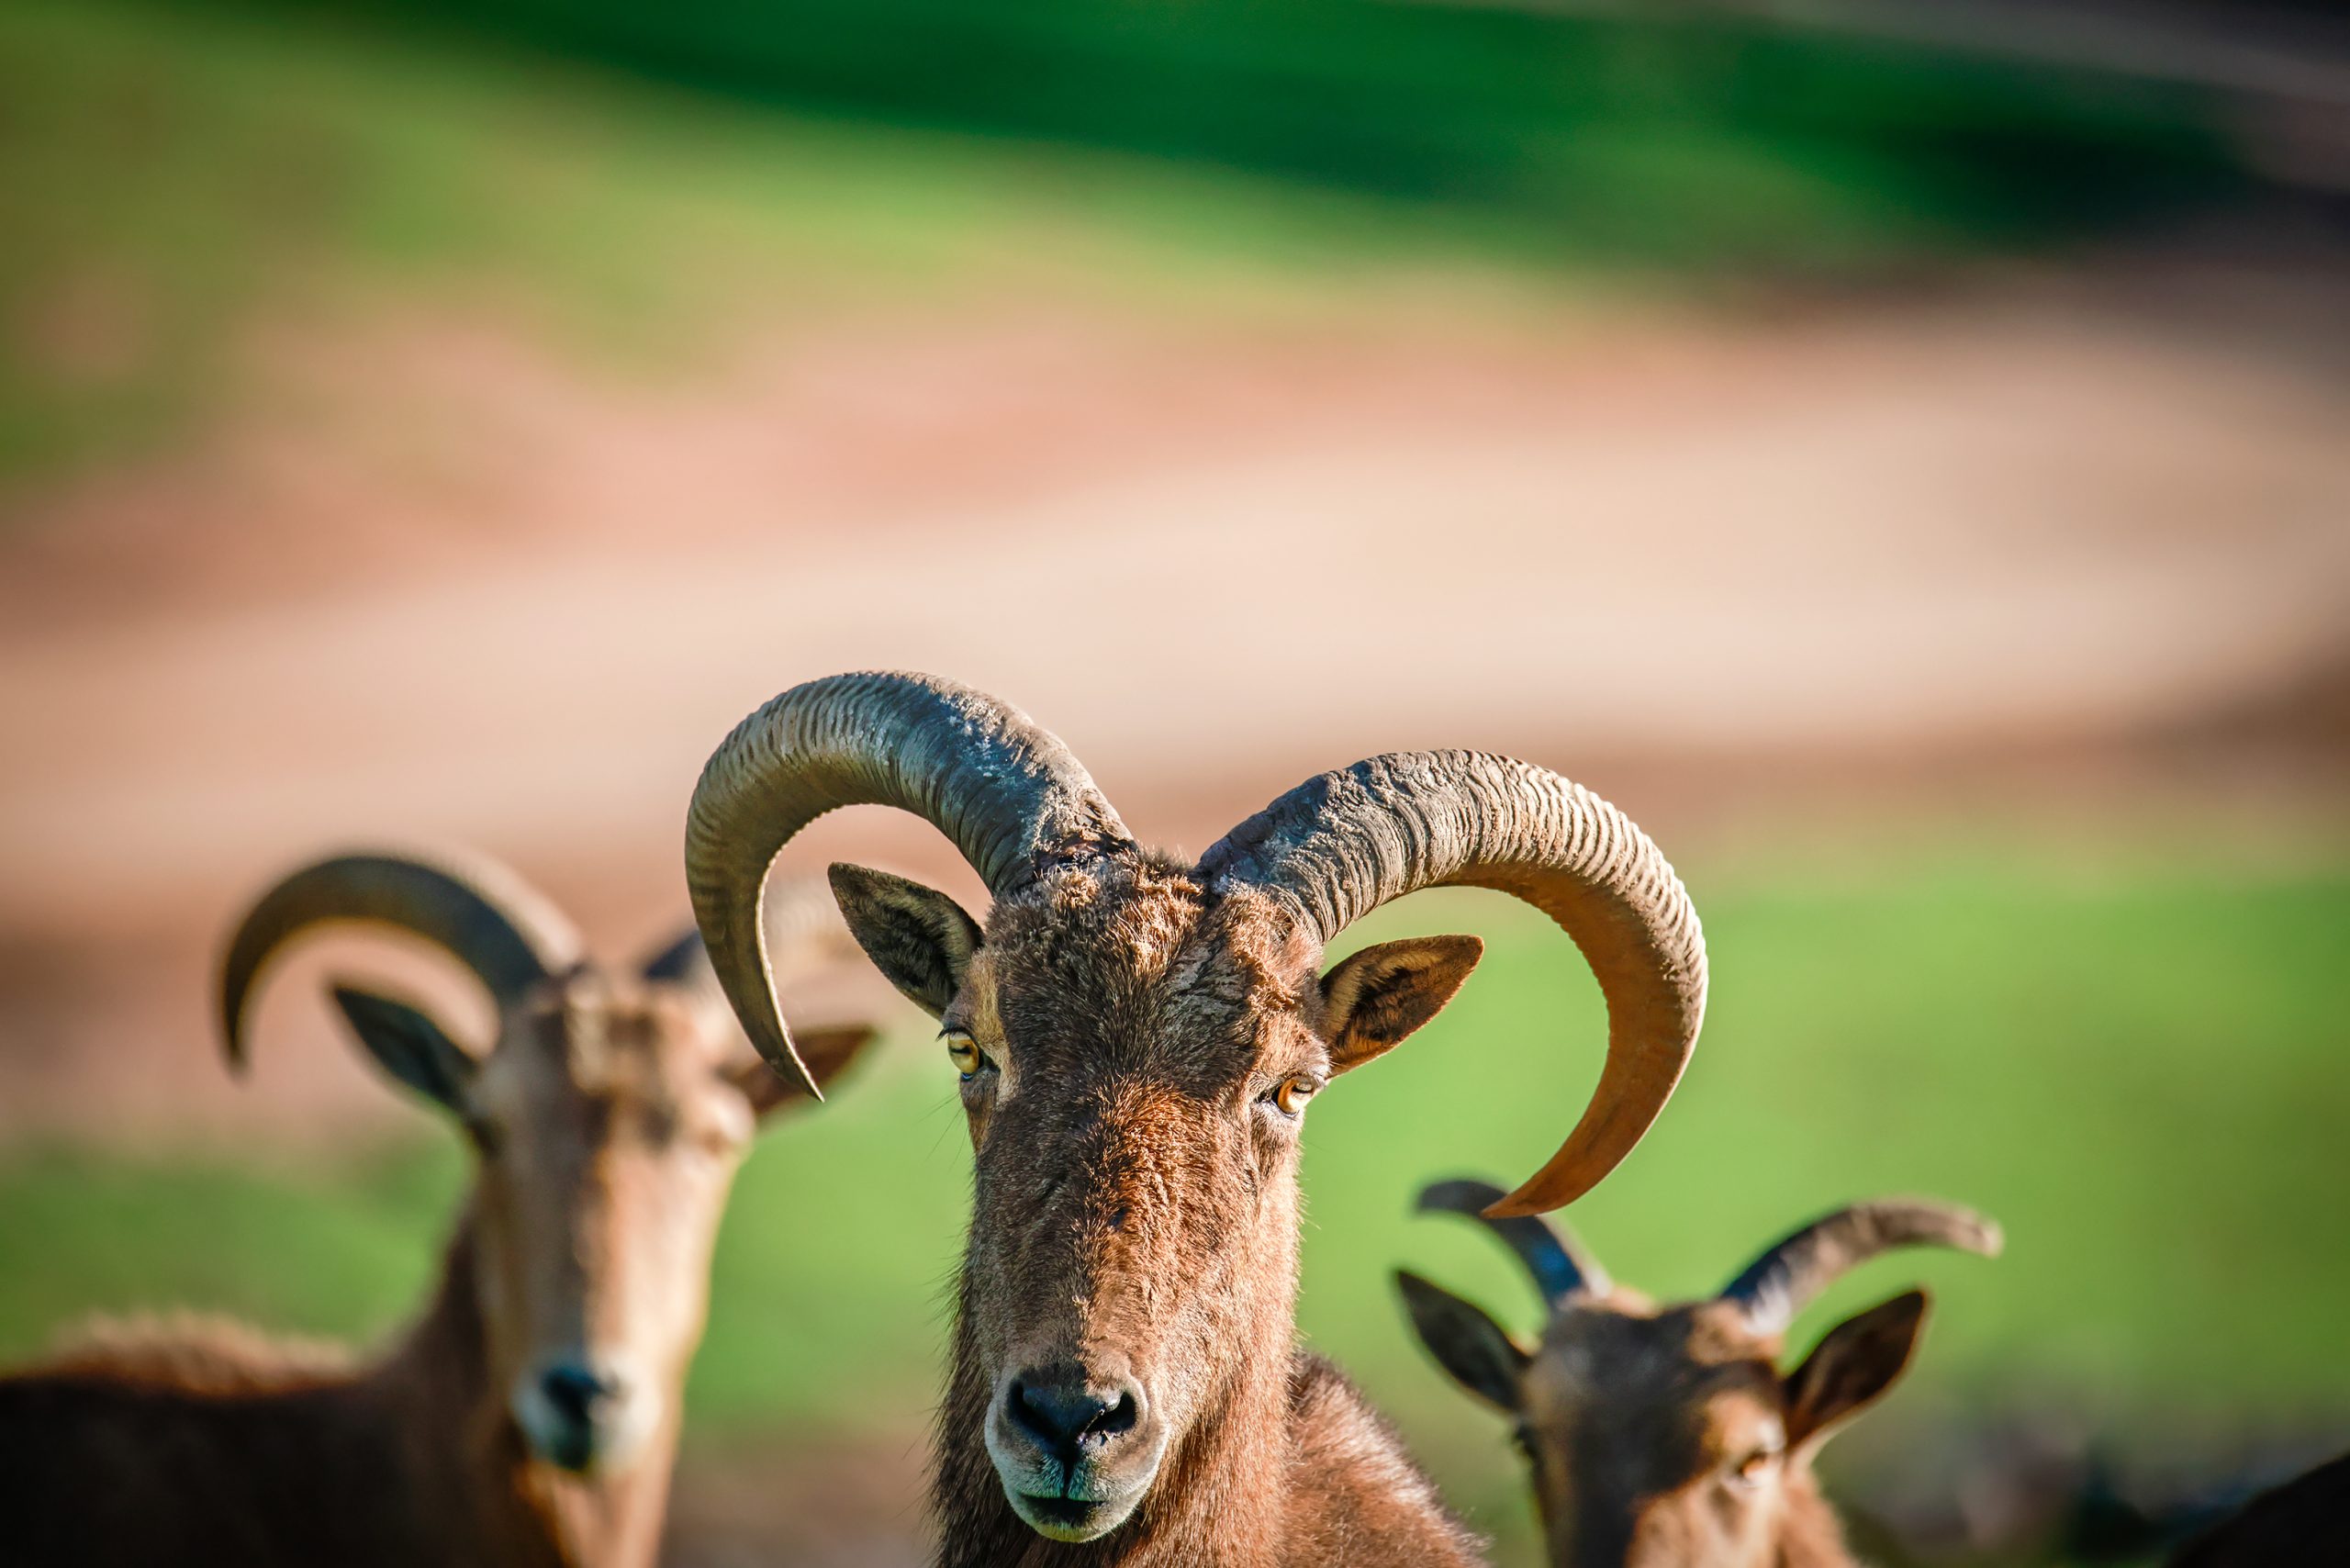 The Barbary sheep, also known as Aoudad, is native to rocky mountain terrain in North Africa.